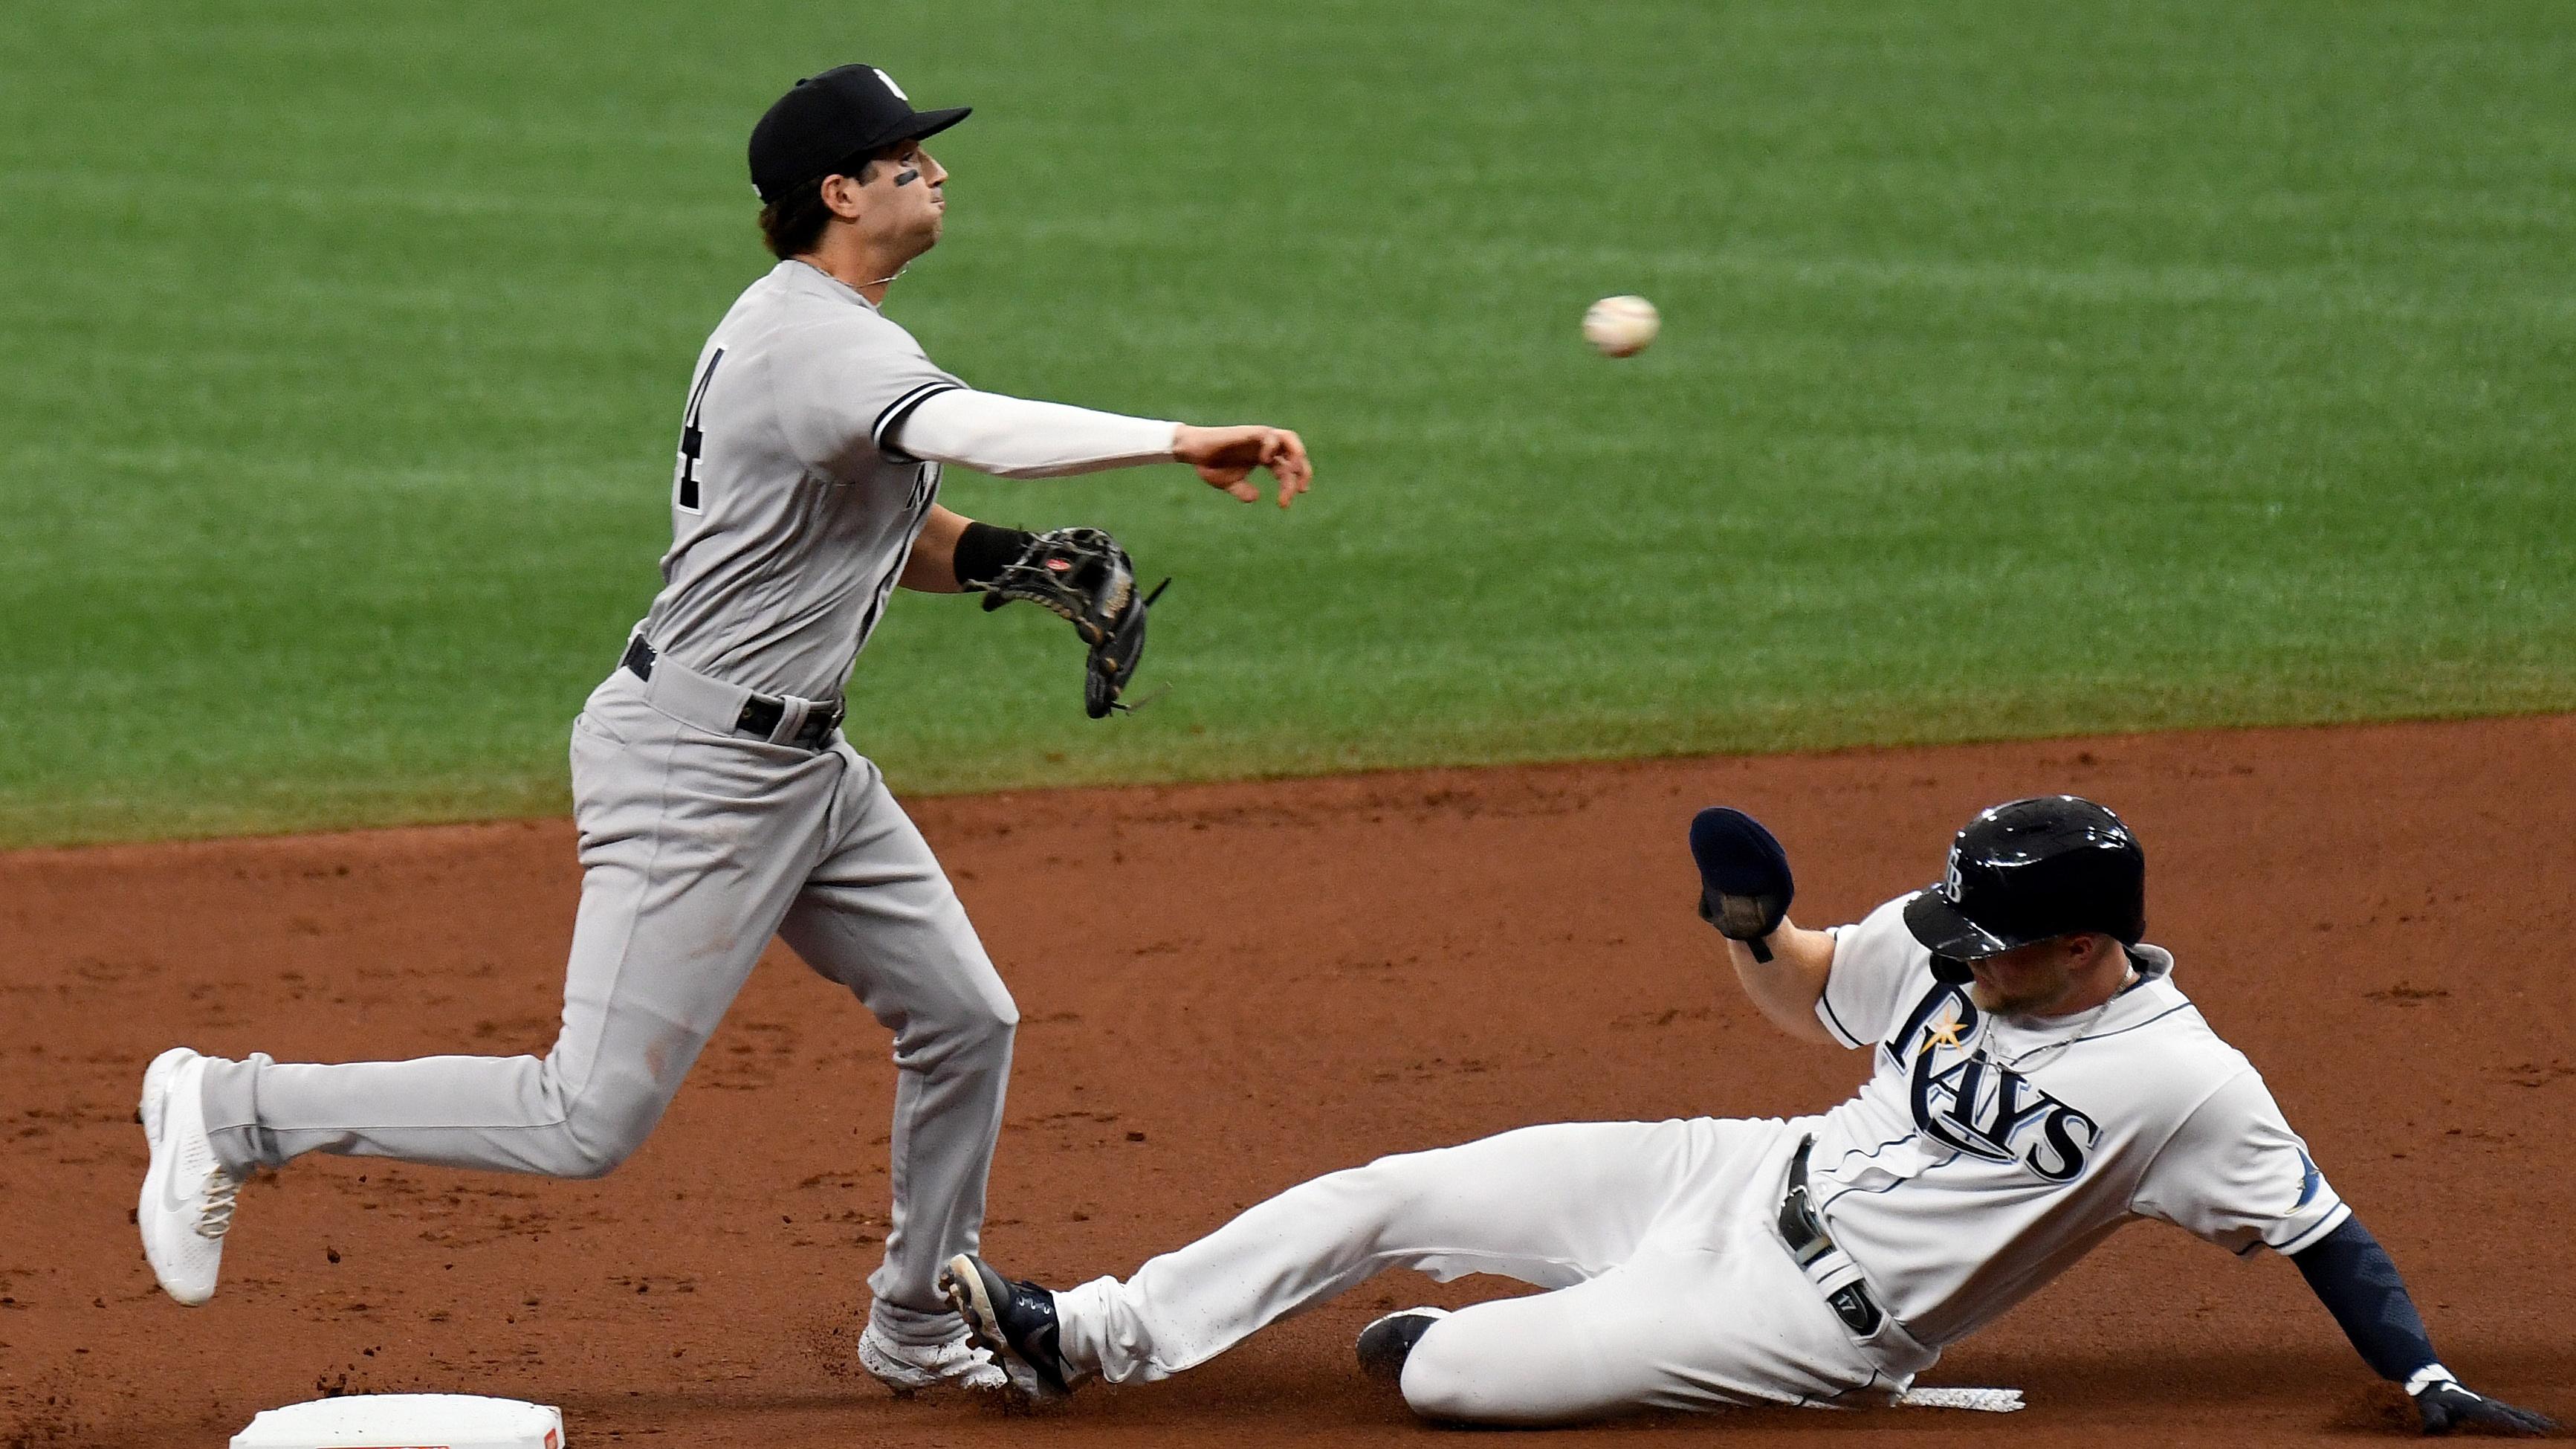 Apr 9, 2021; St. Petersburg, Florida, USA; New York Yankees infielder Tyler Wade (14) throws to first base as Tampa Bay Rays outfielder Austin Meadows (17) slides in the first inning at Tropicana Field. Mandatory Credit: Jonathan Dyer-USA TODAY Sports / © Jonathan Dyer-USA TODAY Sports